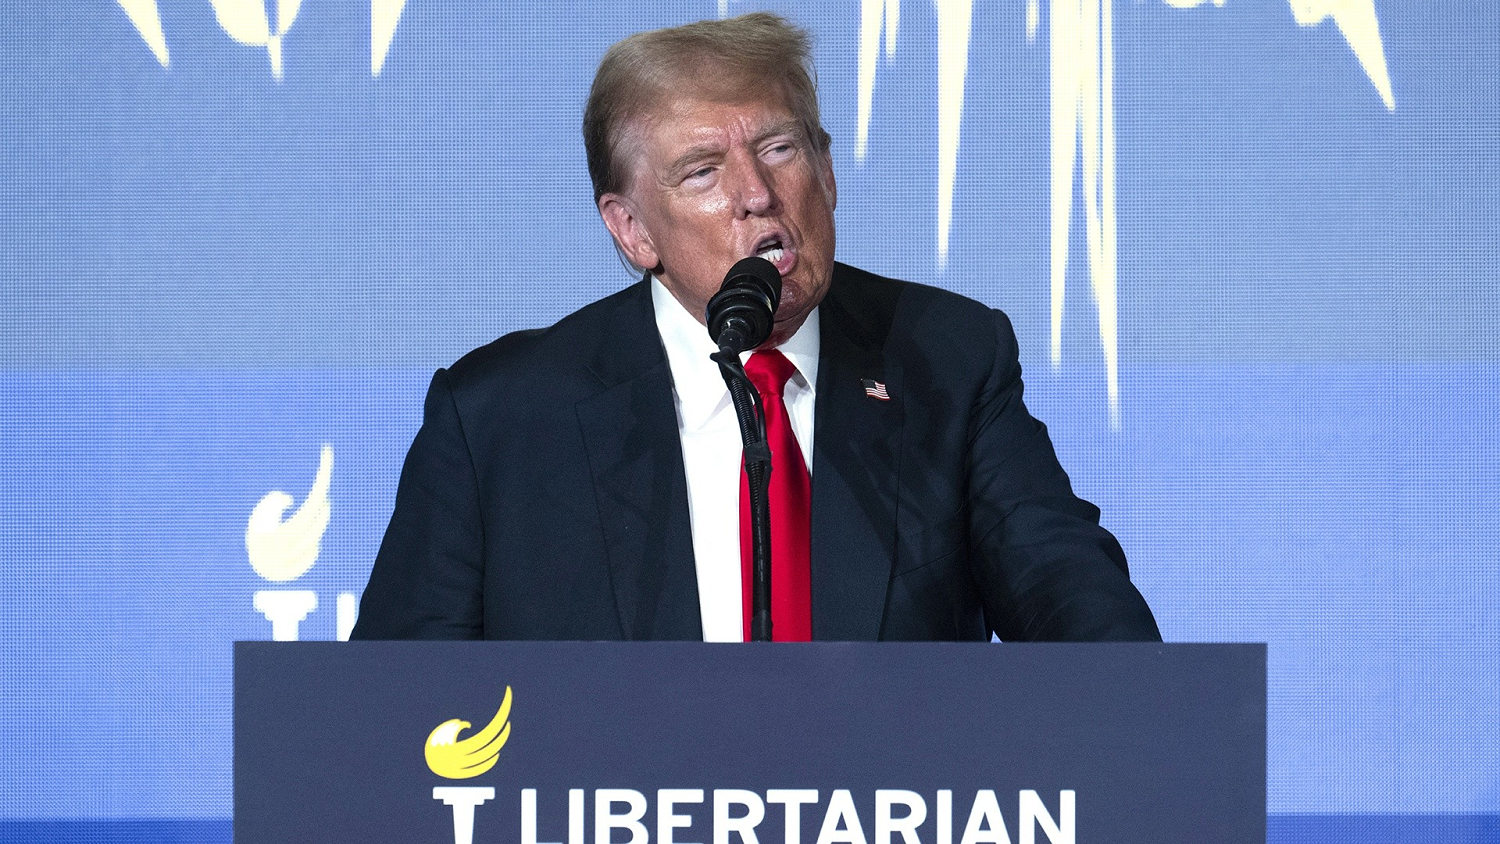 Trump is met with boos, jeers at Libertarian National Convention